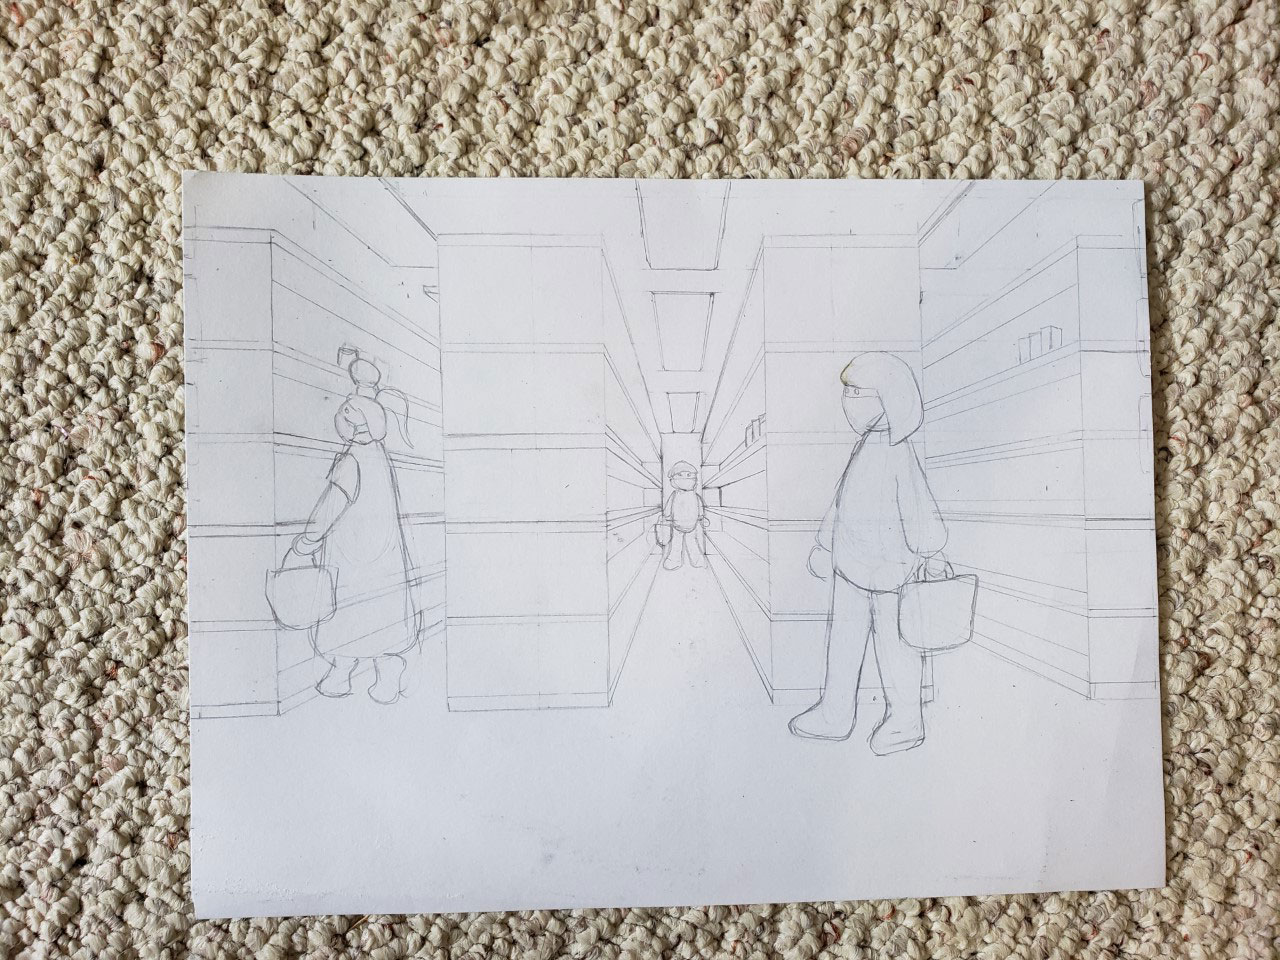 Pencil sketch of people shopping in a store and wearing masks.